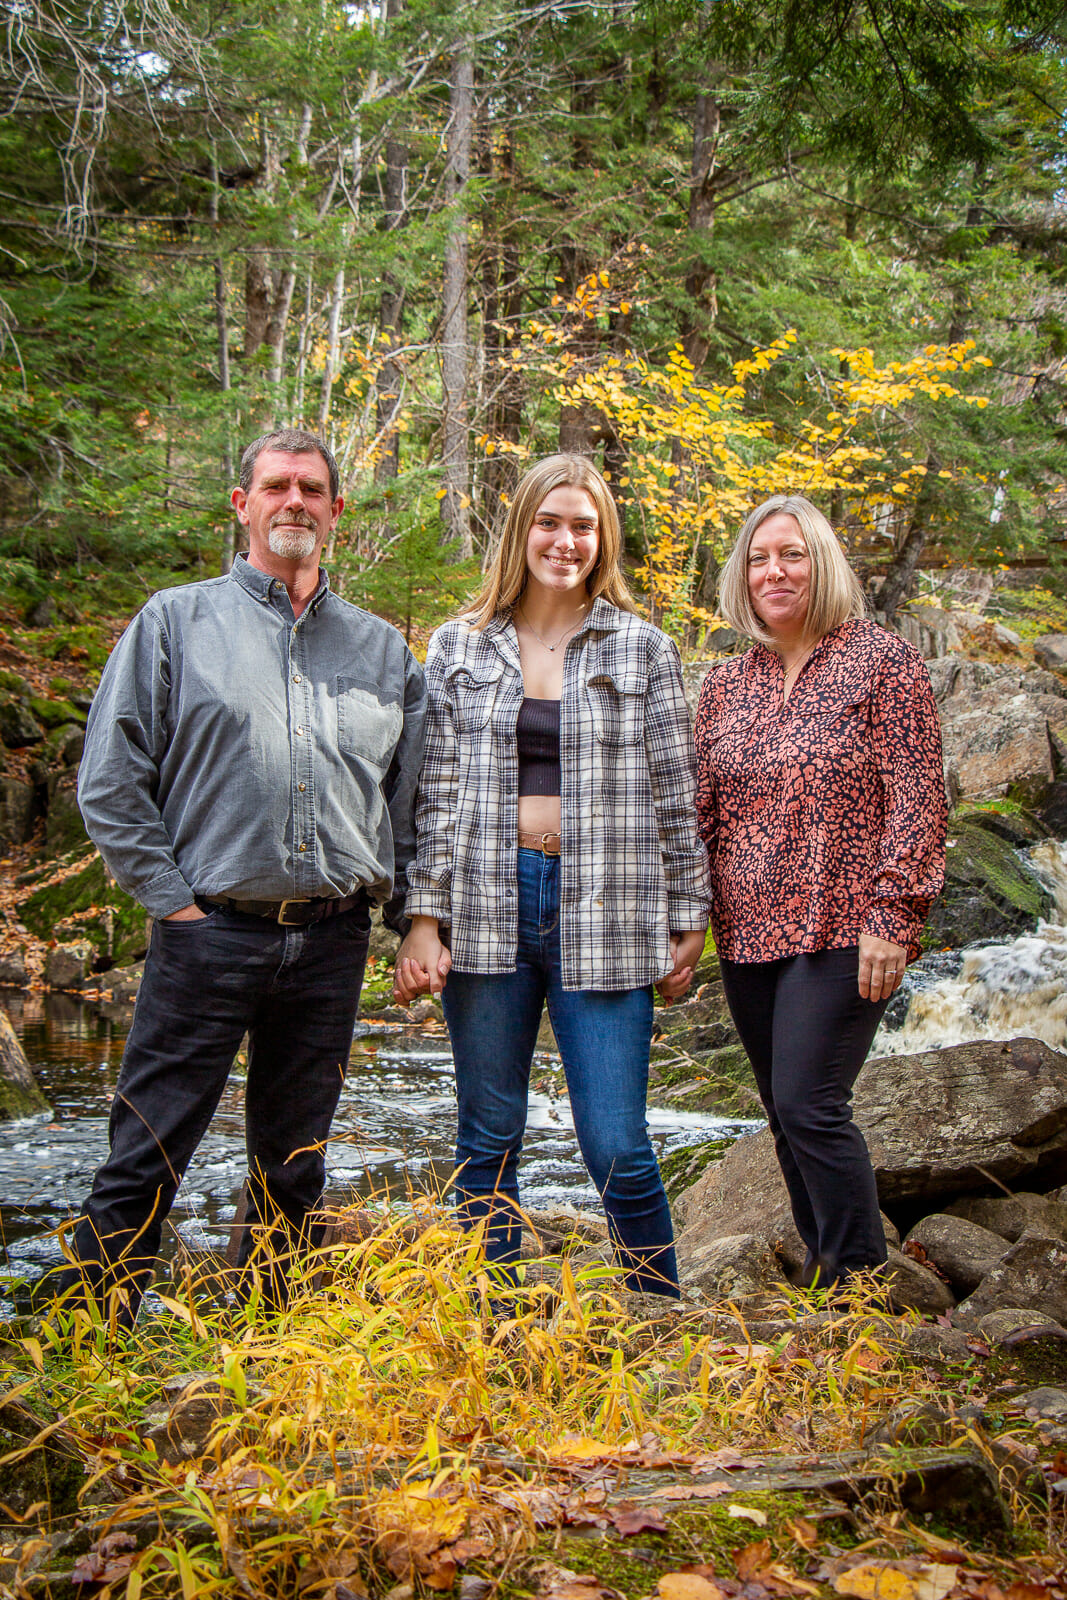 A photo from Jenna Longmire's Graduation session, shot in Acacia Valley Trail in Digby, with family members on a beautiful vibrant fall day